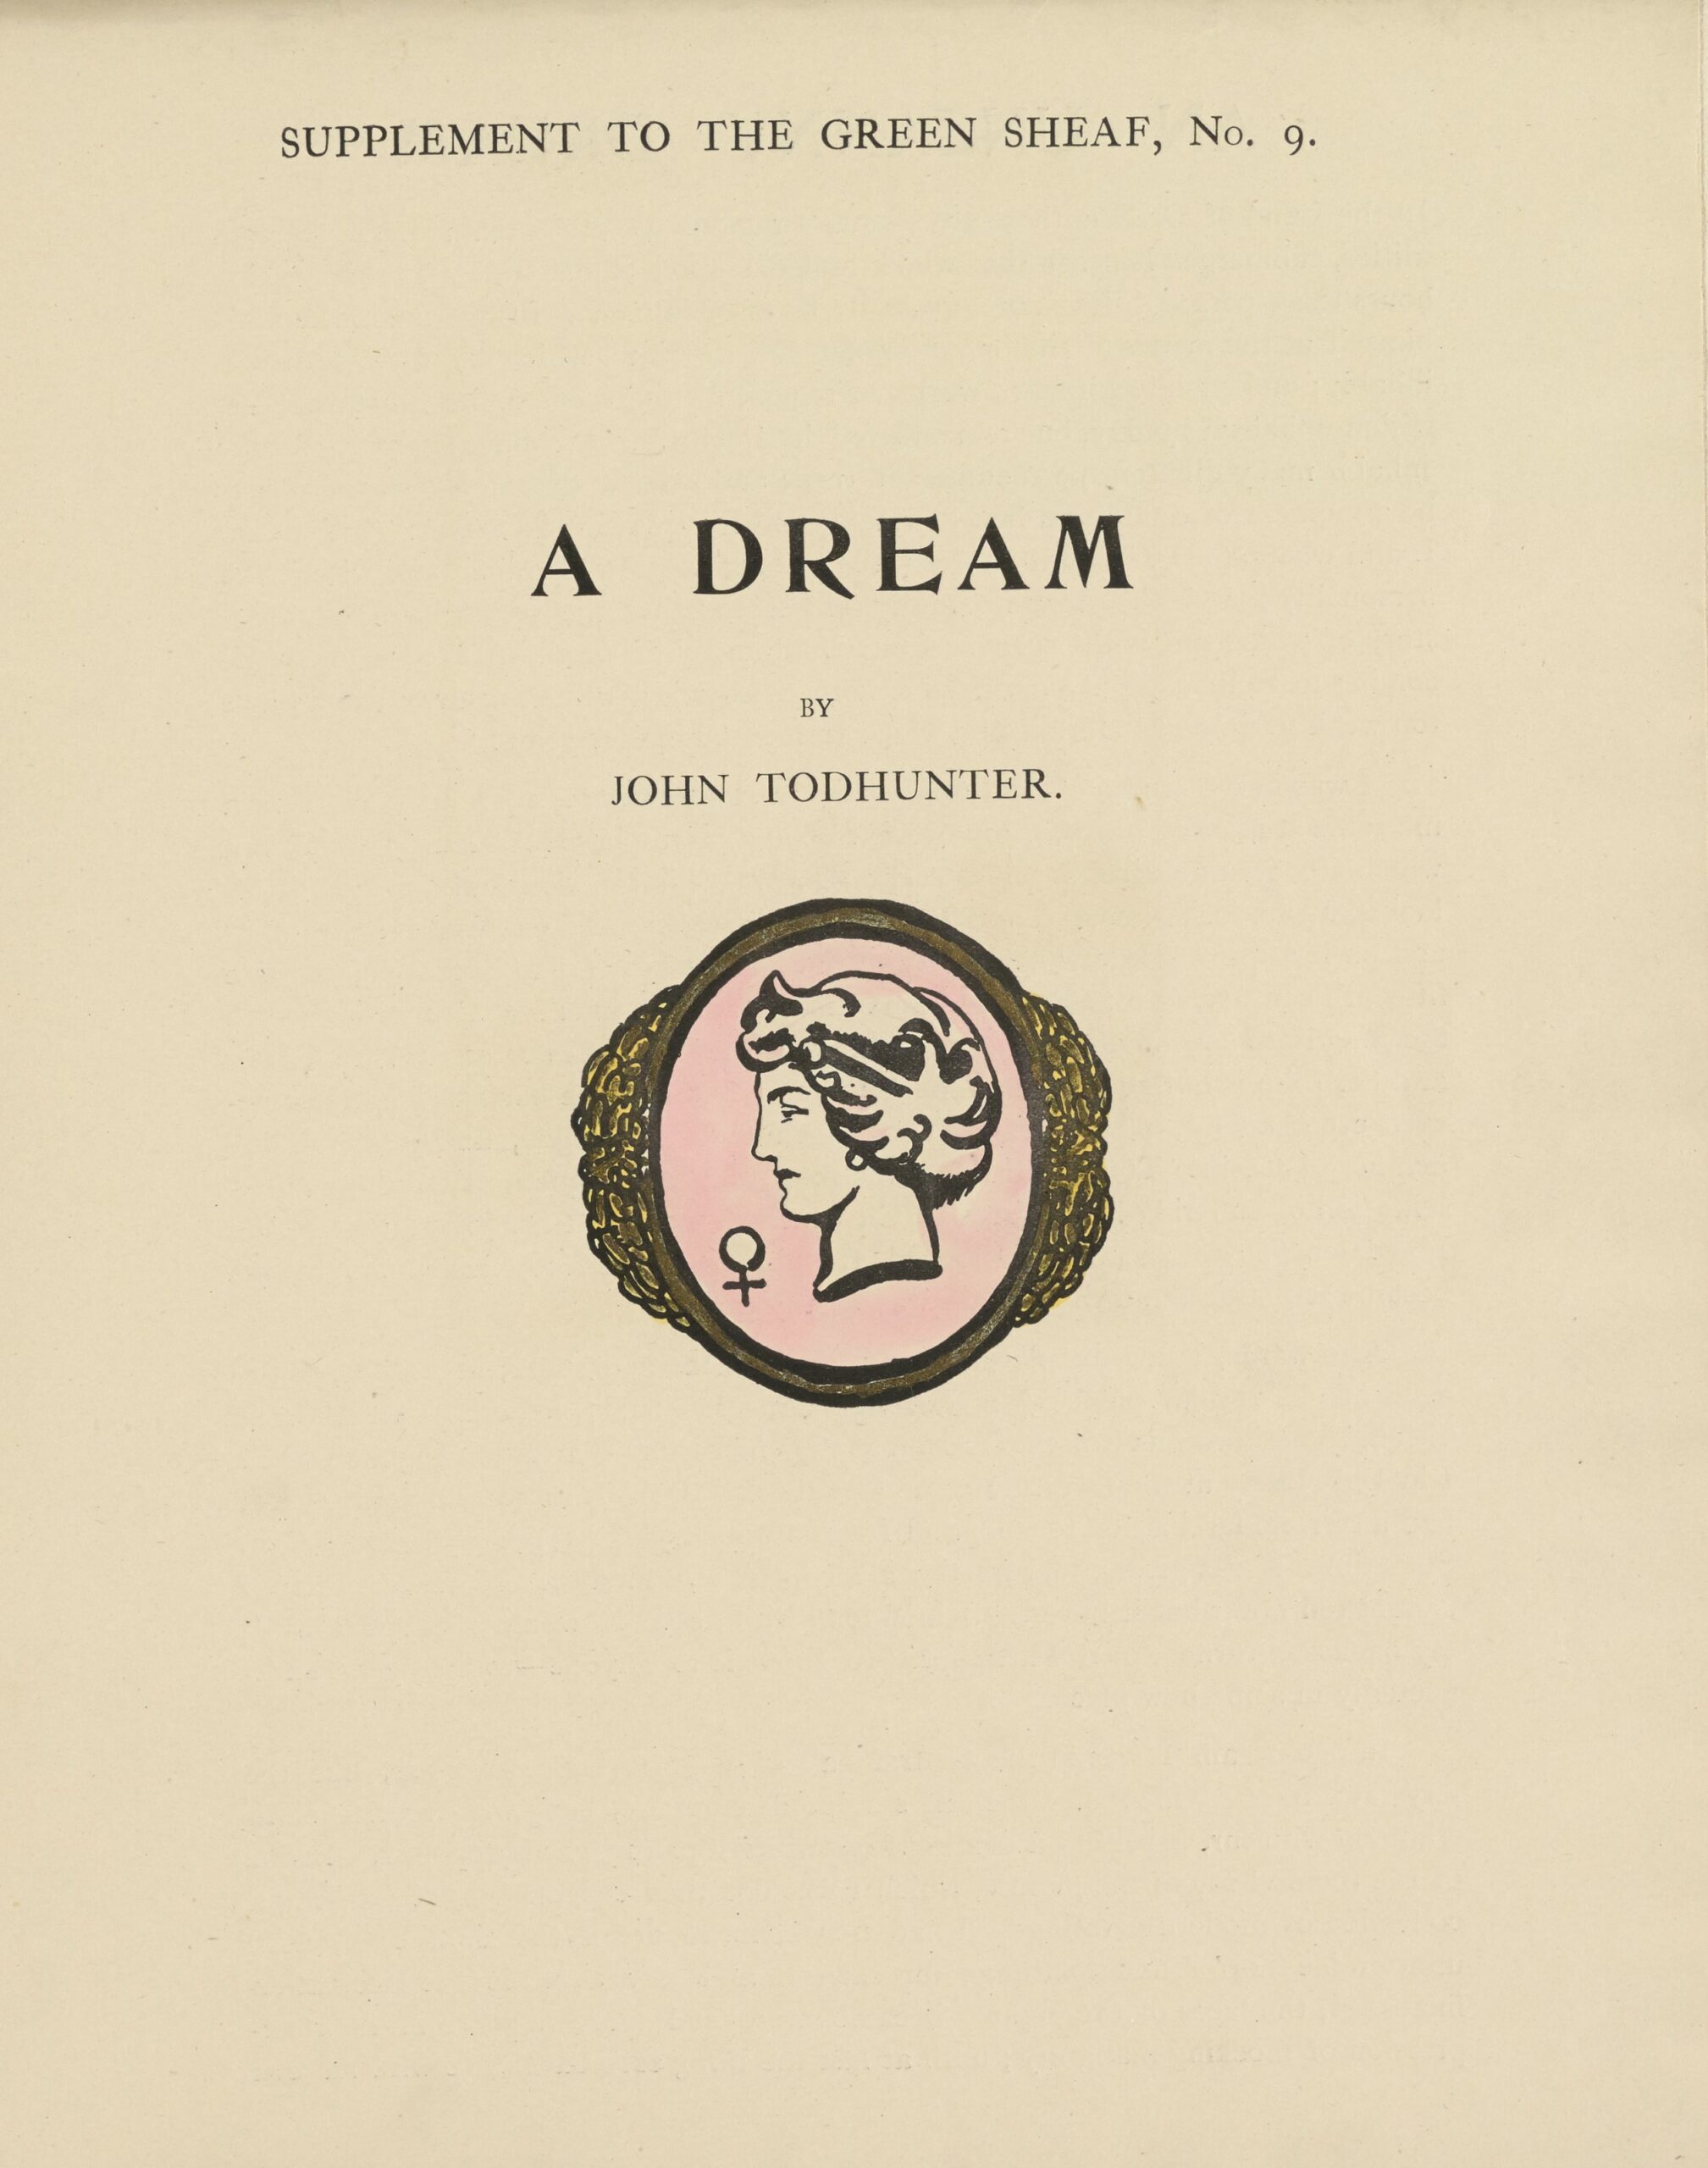 At the top of this decorated title page, a header is printed: “Supplement To the Green Sheaf, No. 9.” In the middle of the page, the title and author’s name are printed, “A Dream / by / John Todhunter.” Below this is an unsigned coloured medallion, depicting a woman’s head in profile, facing left. Her face and short, curly hair are rendered in black ink on a pink background, similar to a cameo. At the bottom left of the cameo is the symbol for female. The medallion is framed in a wide gold antique-style frame, with filigree on either side.